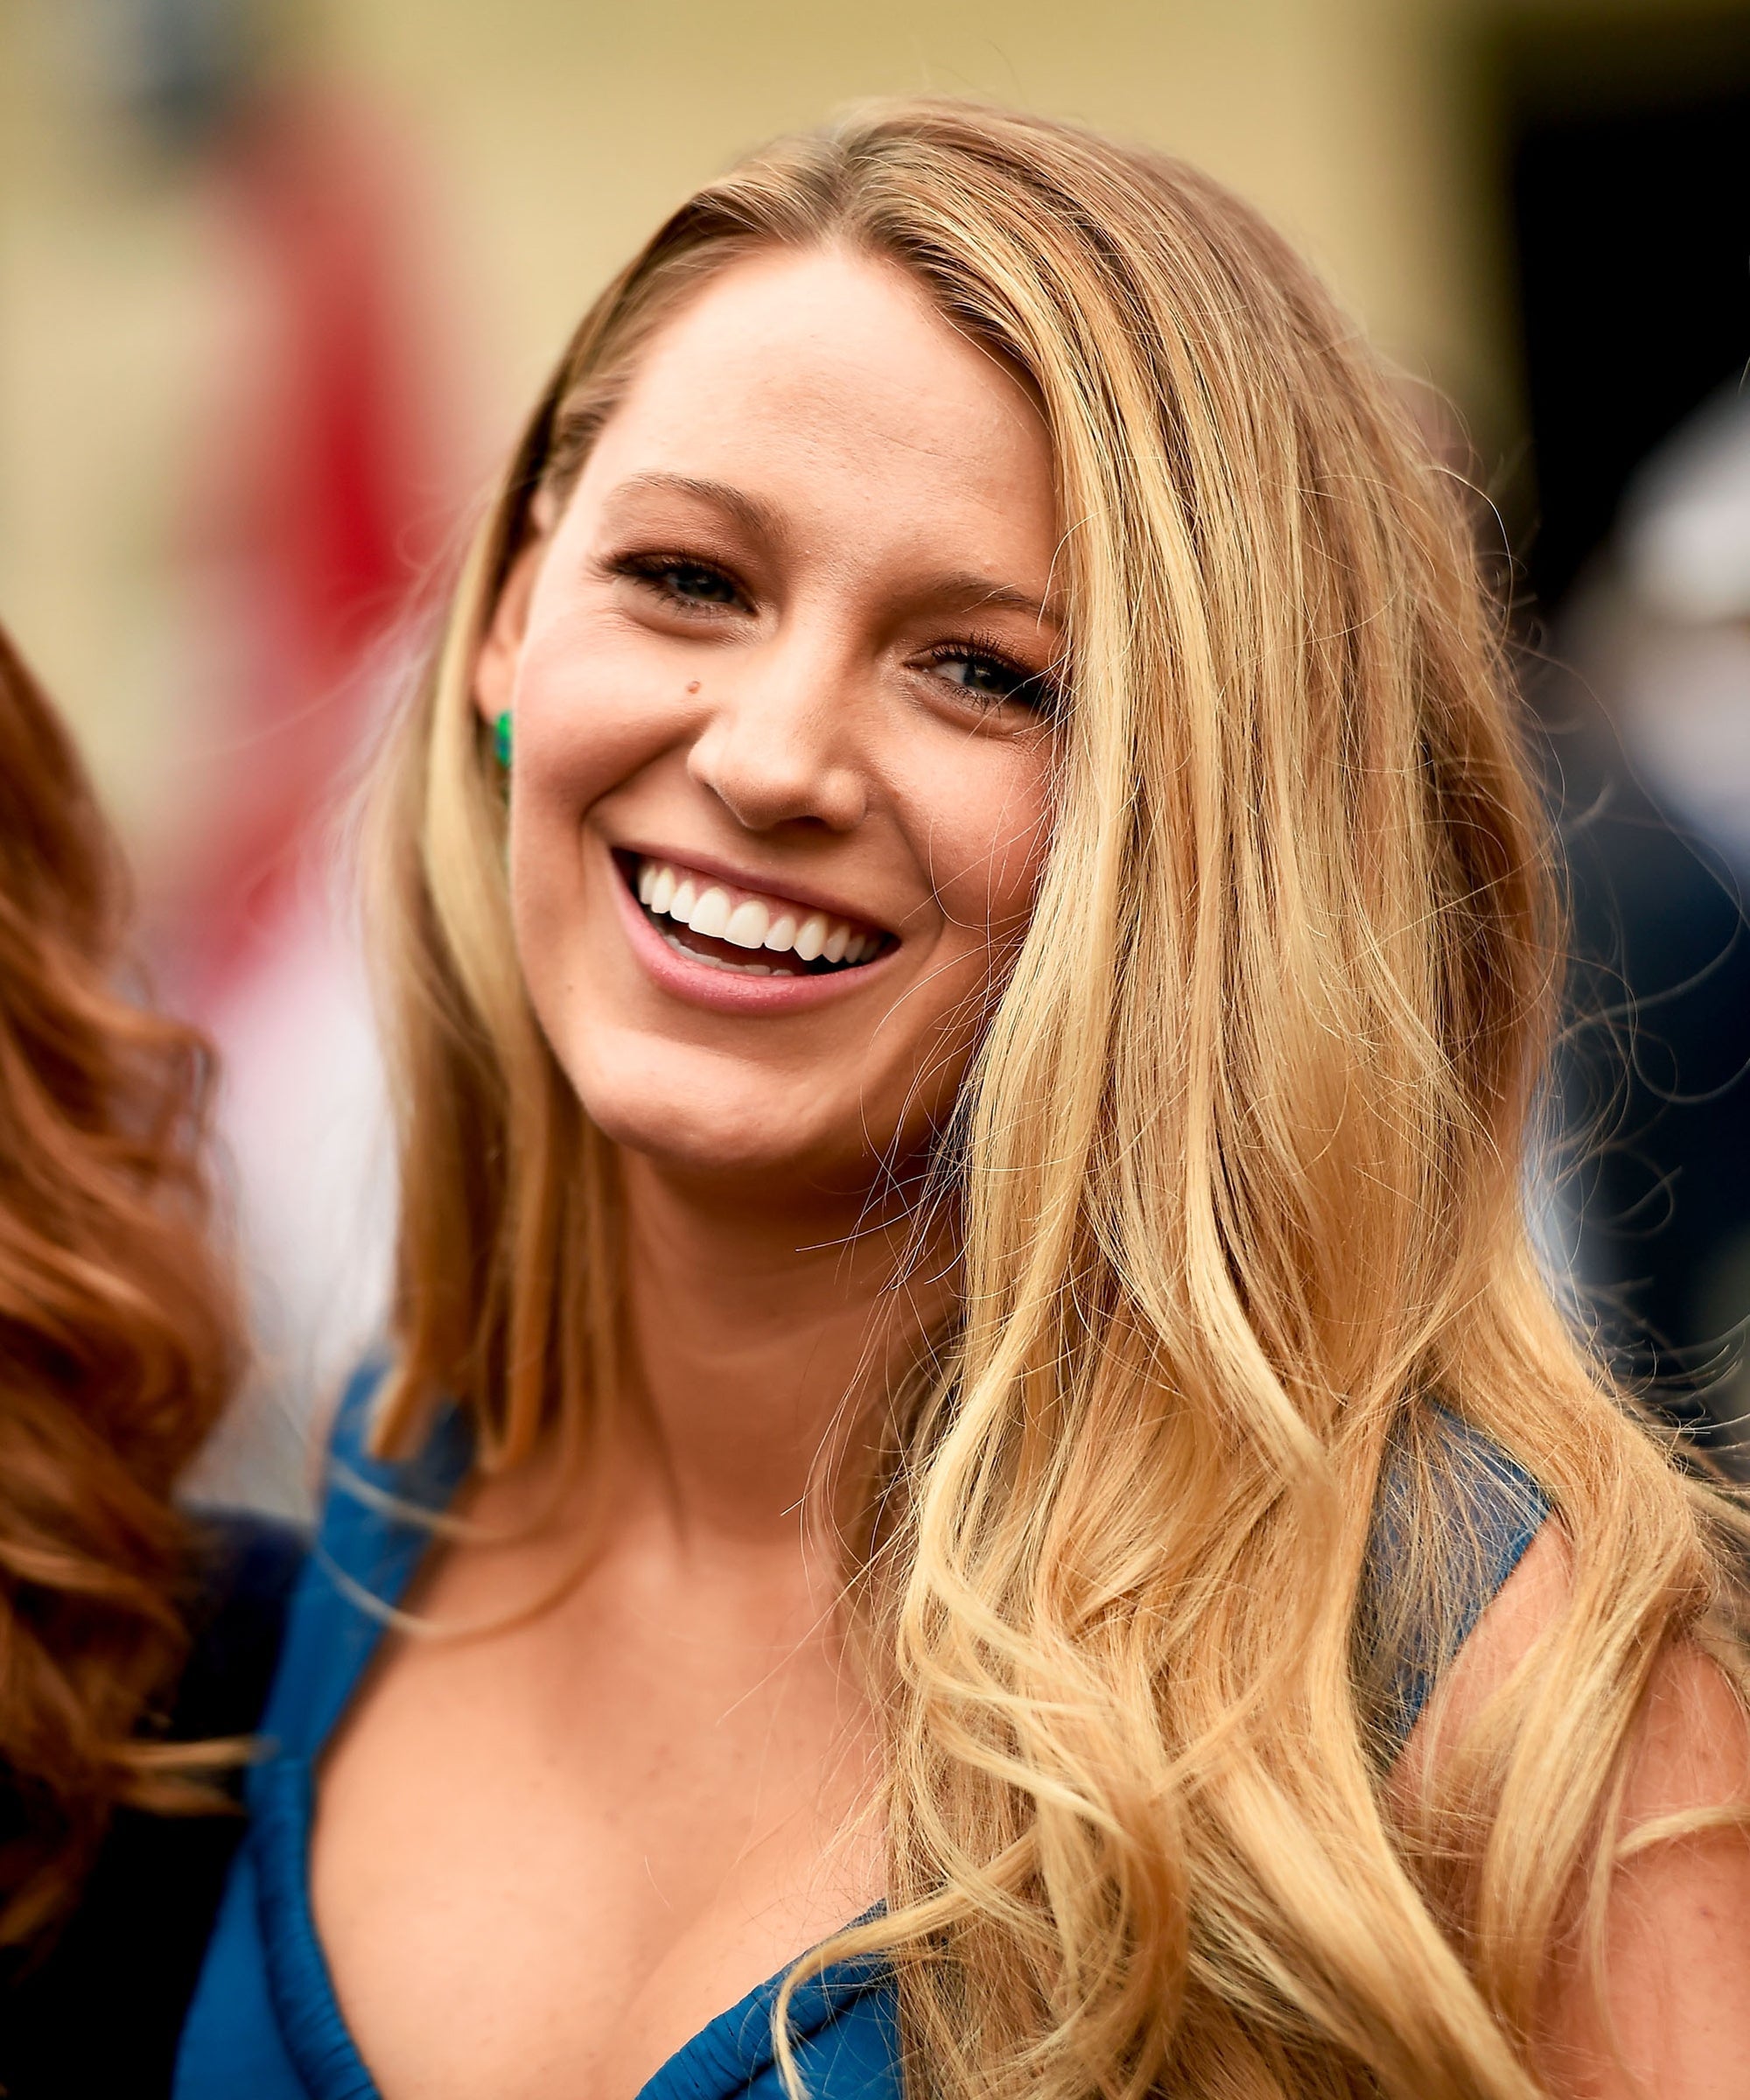 Blake Lively Shares Photo of Bad Hair Day